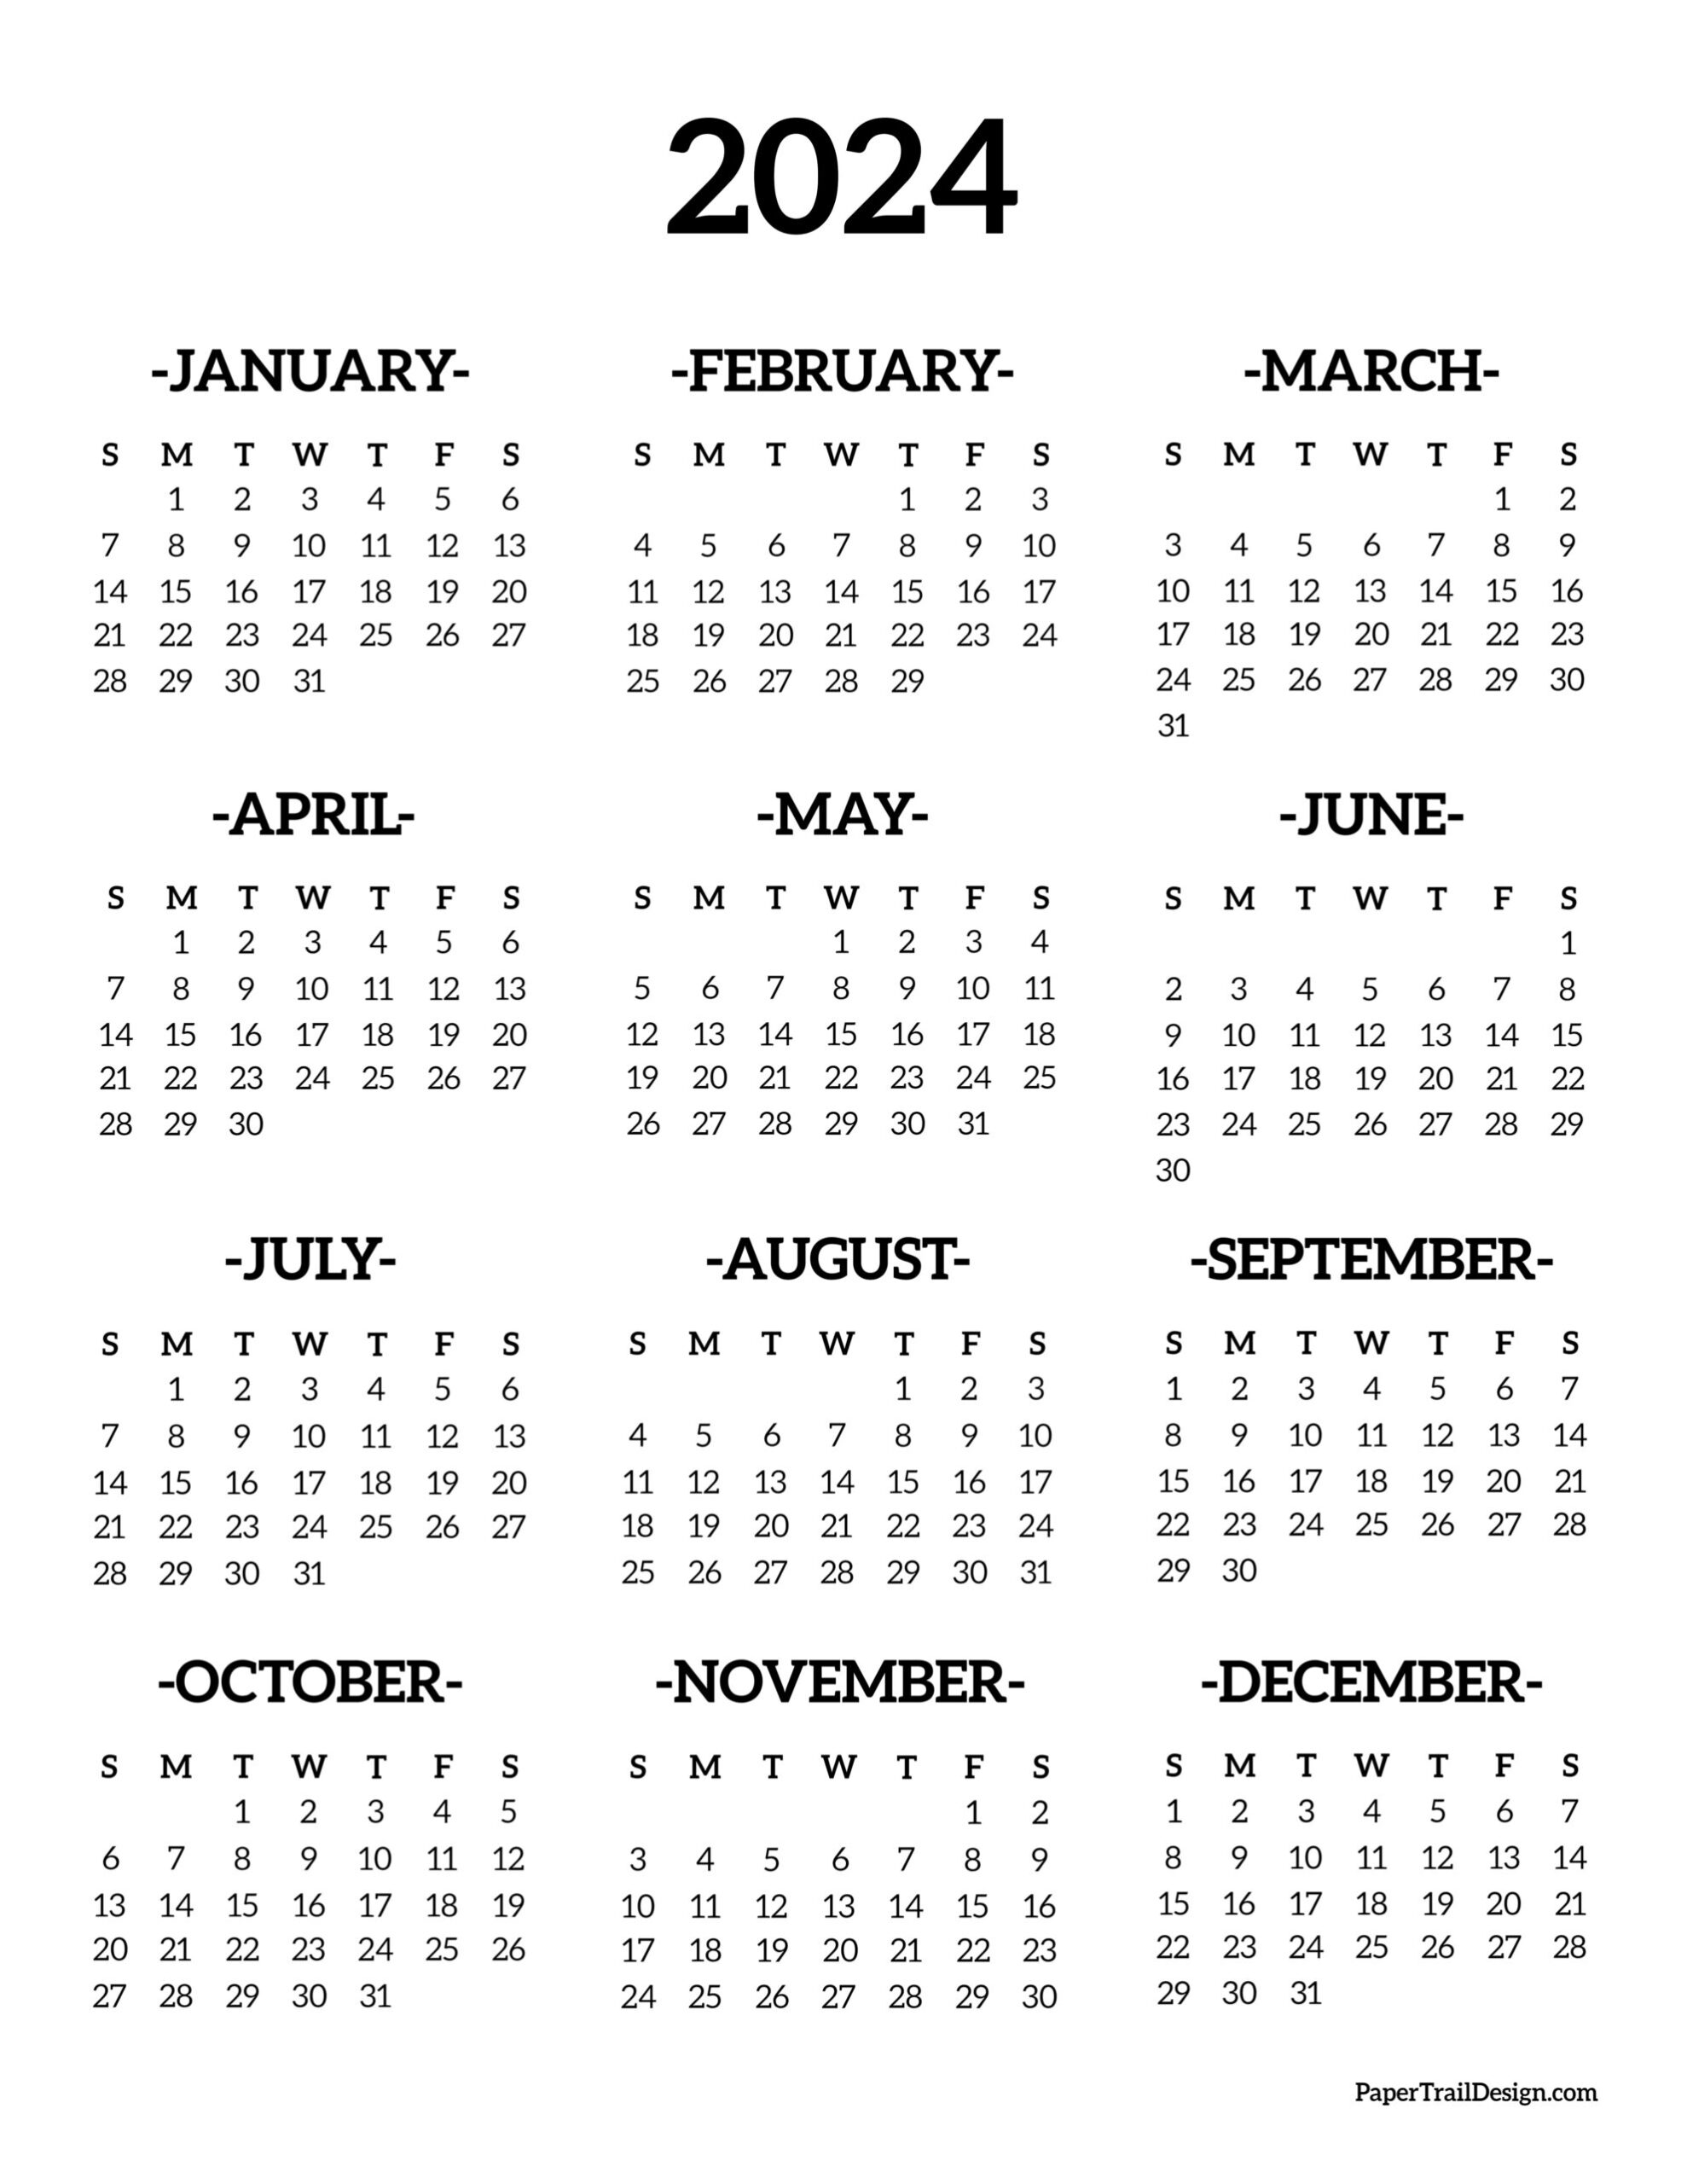 Calendar 2024 Printable One Page - Paper Trail Design for 2024 Full Year Calendar Printable Free